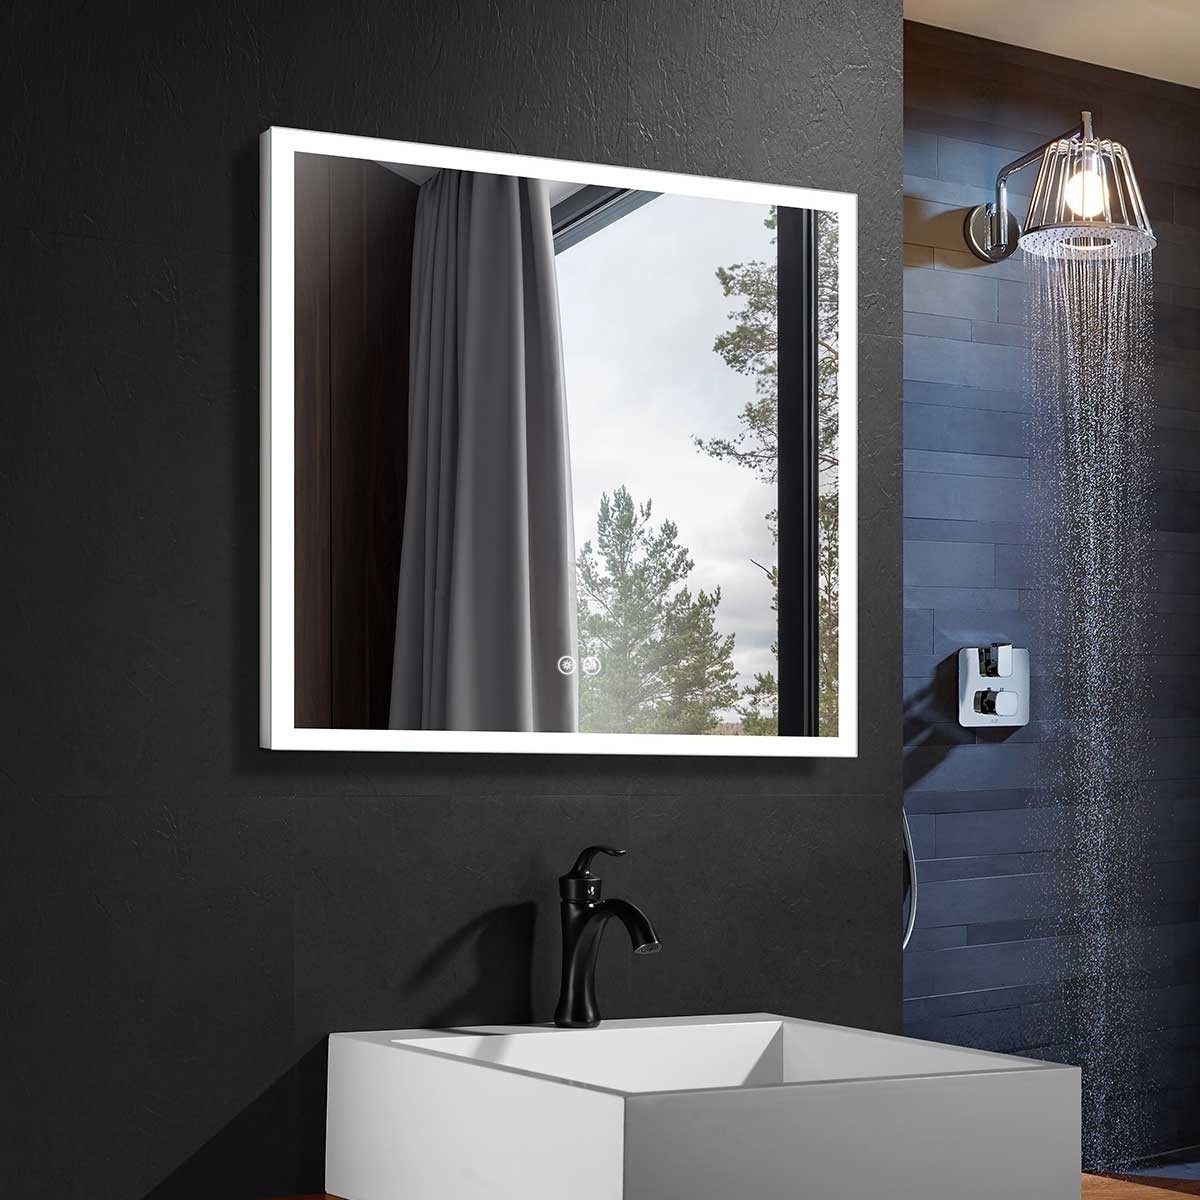 DECORAPORT 36 x 36 Inch LED Bathroom Mirror with Touch Button, Anti Fog, Dimmable (D112-3636)